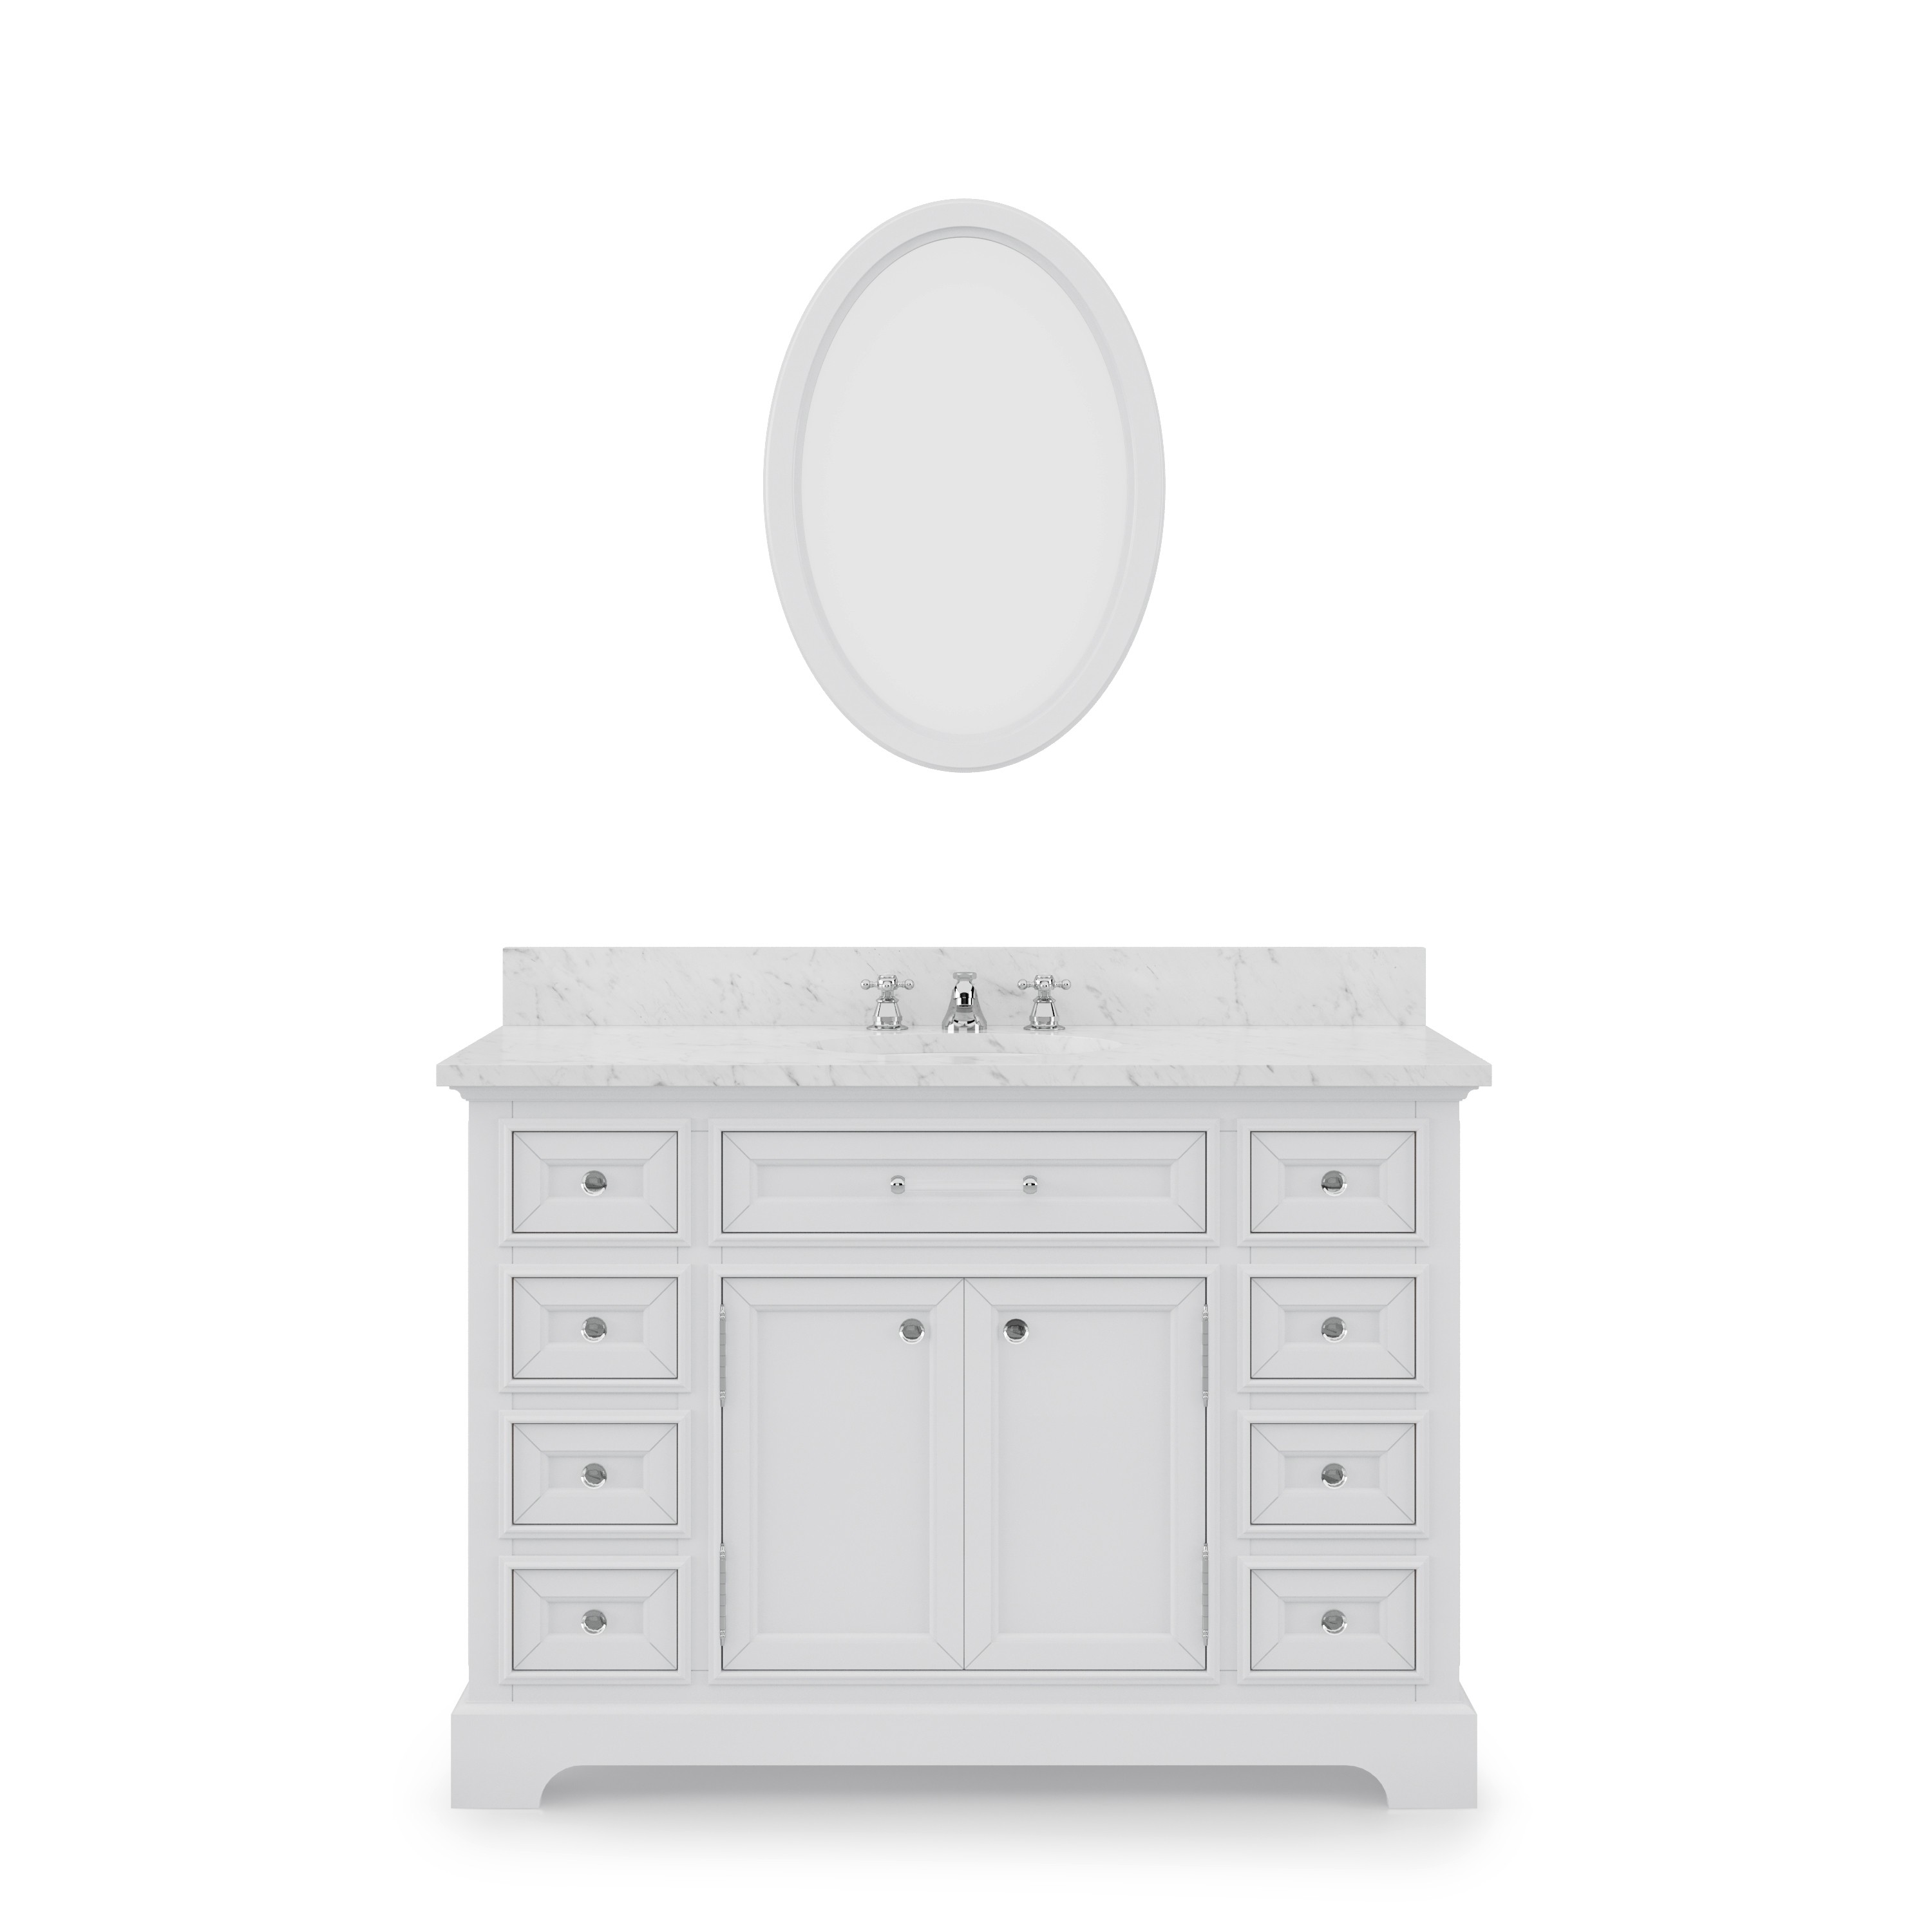 WATER-CREATION DE48CW01PW-O24000000 DERBY 48 INCH PURE WHITE SINGLE SINK BATHROOM VANITY WITH MATCHING FRAMED MIRROR